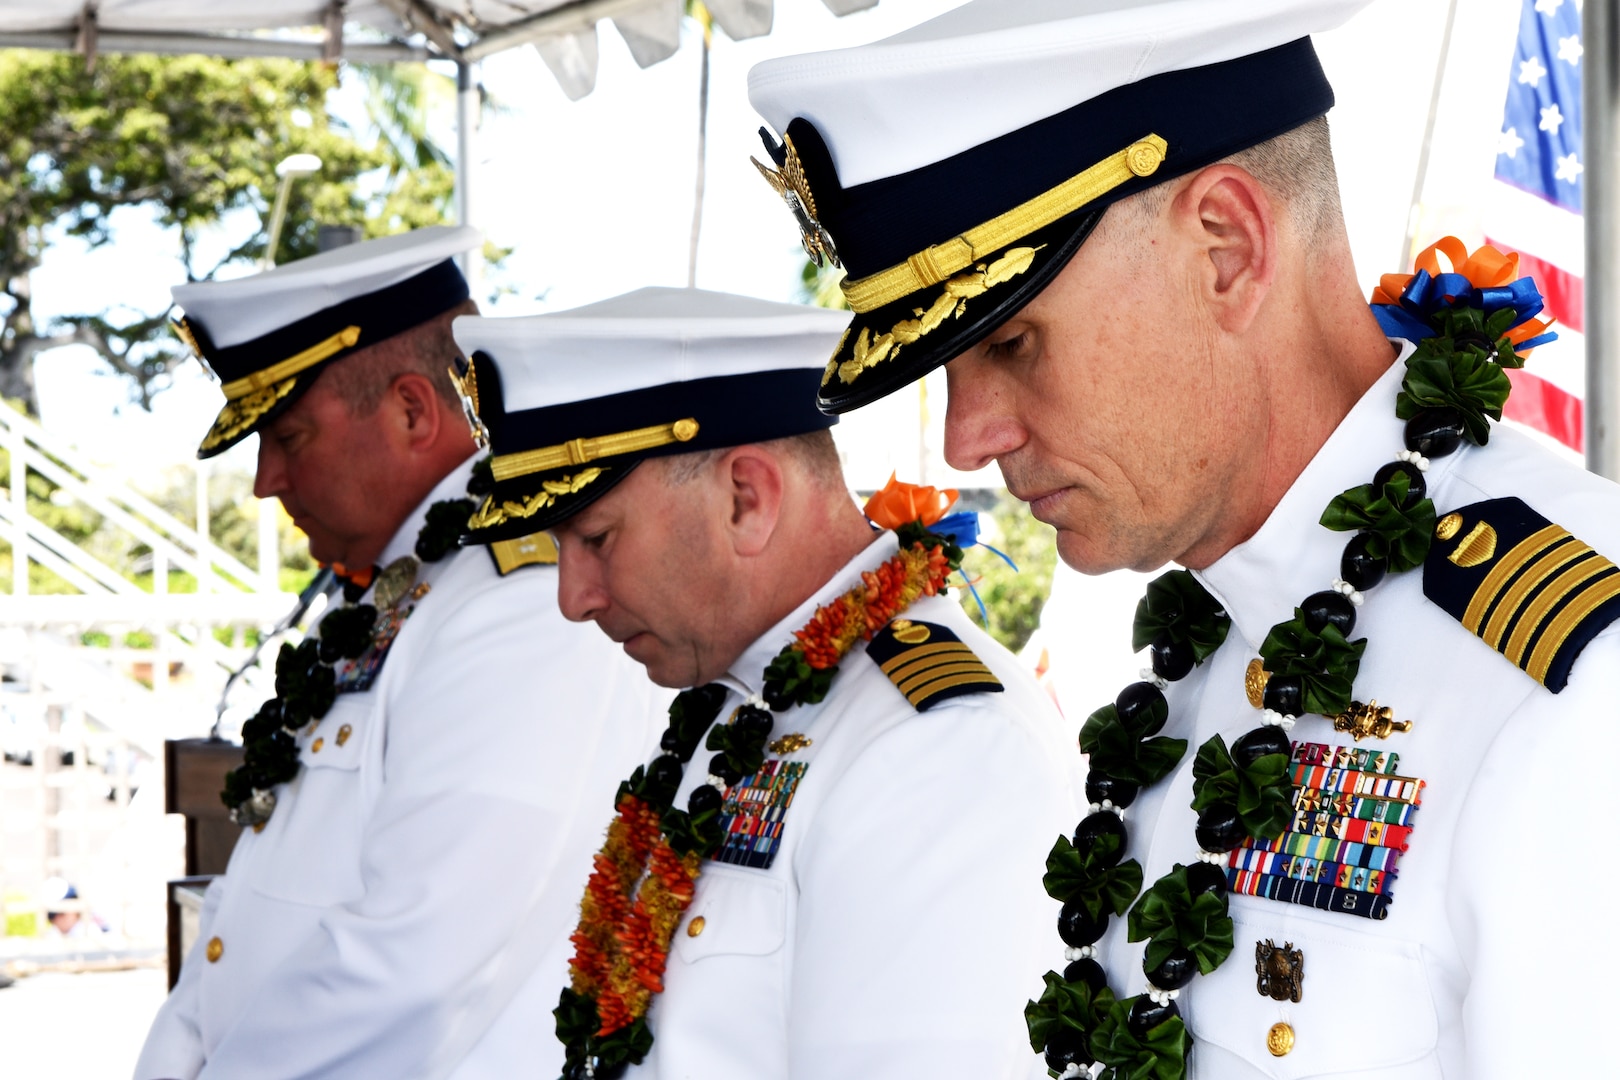 Capt. Brian Krautler, Capt. Stephen Adler and Rear Adm. Matthew Sibley (right to left) bow their heads in prayer during benediction at a change of command ceremony aboard the U.S. Coast Guard Cutter Stratton (WMSL 752) at Base Honolulu, April 17, 2023. Krautler assumed command of the Stratton, continuing his more than 12 years of sea service. (U.S. Coast Guard photo by Petty Officer 2nd Class Michael Clark)